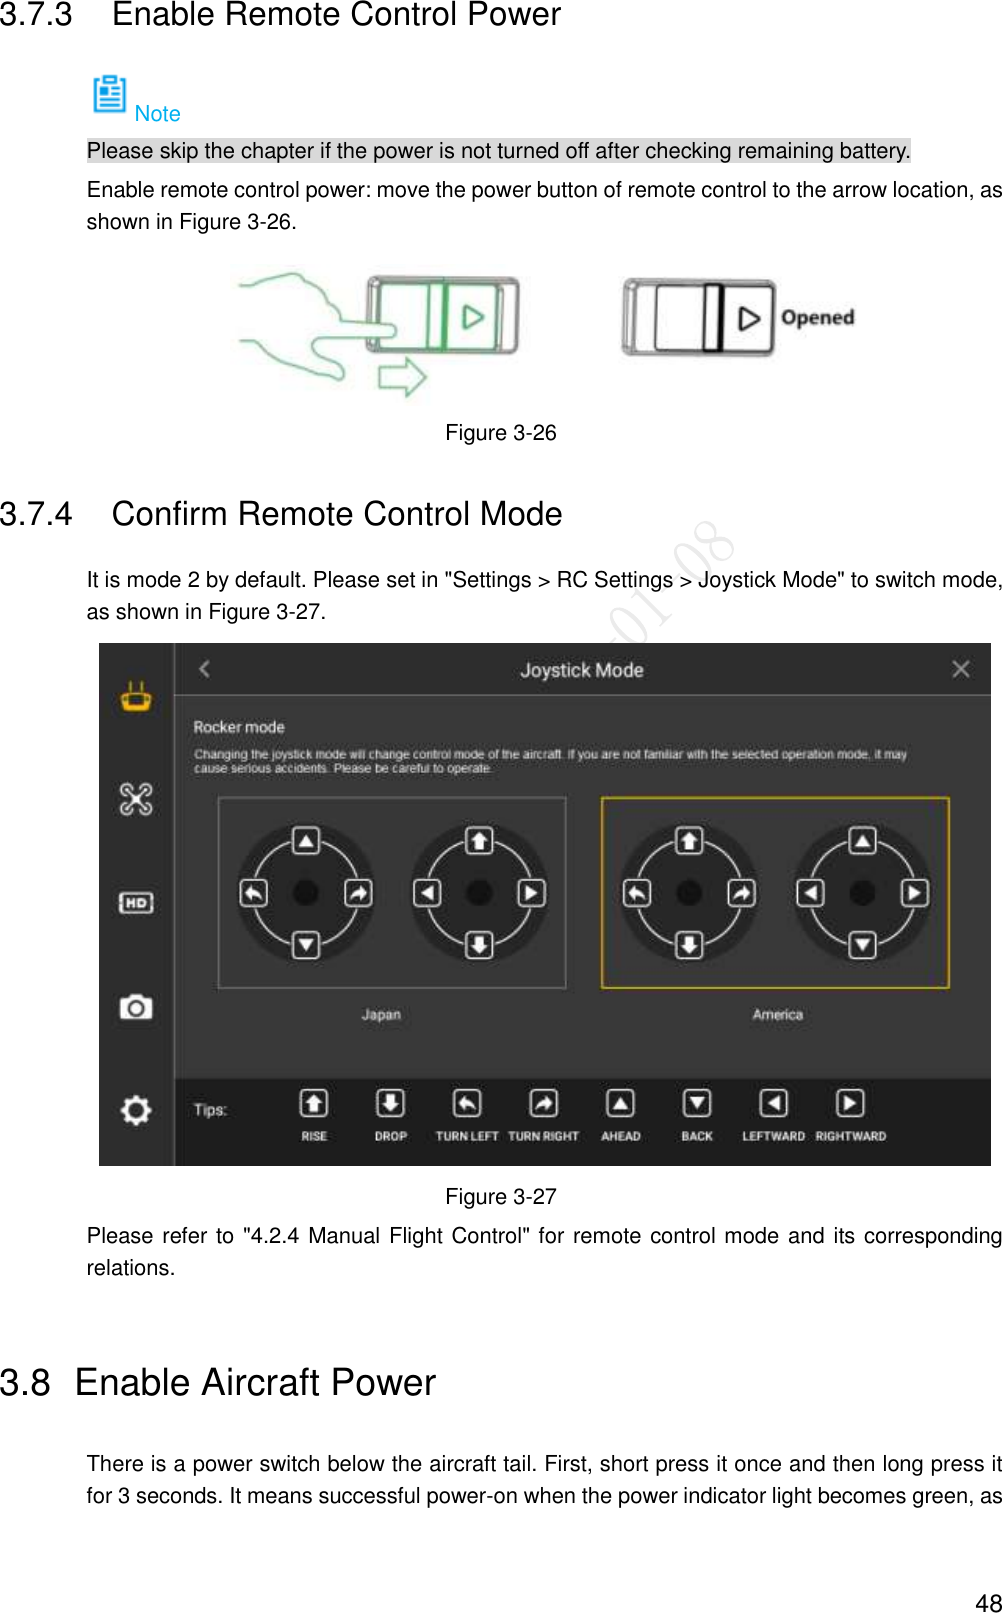  48 3.7.3  Enable Remote Control Power Note Please skip the chapter if the power is not turned off after checking remaining battery. Enable remote control power: move the power button of remote control to the arrow location, as shown in Figure 3-26.  Figure 3-26 3.7.4  Confirm Remote Control Mode It is mode 2 by default. Please set in &quot;Settings &gt; RC Settings &gt; Joystick Mode&quot; to switch mode, as shown in Figure 3-27.  Figure 3-27 Please refer to &quot;4.2.4 Manual Flight Control&quot; for remote control mode and its corresponding relations. 3.8  Enable Aircraft Power There is a power switch below the aircraft tail. First, short press it once and then long press it for 3 seconds. It means successful power-on when the power indicator light becomes green, as 